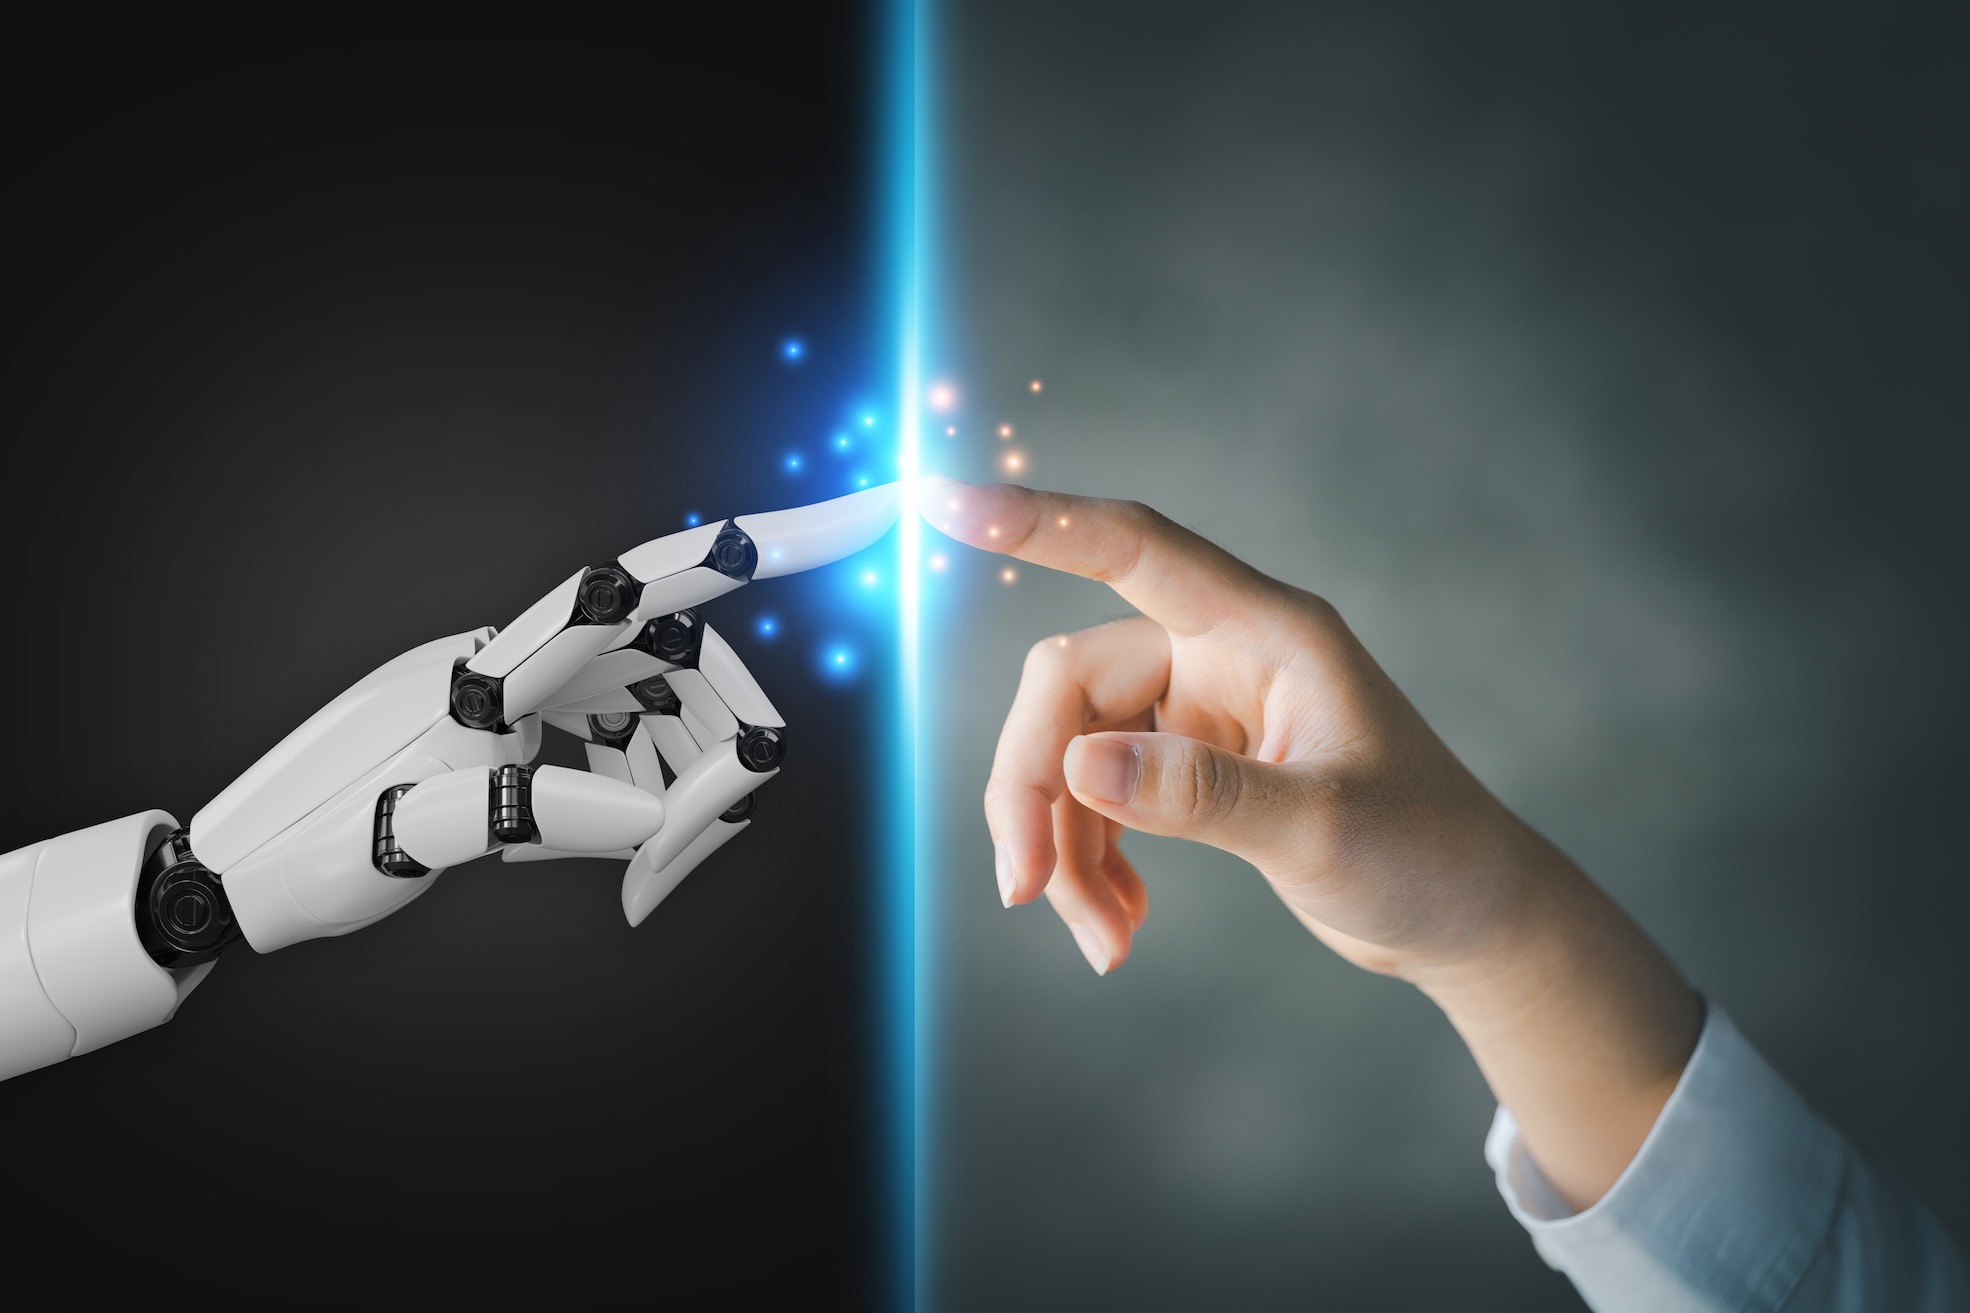 A stock photo of a robot hand and a human hand touching at the fingertips